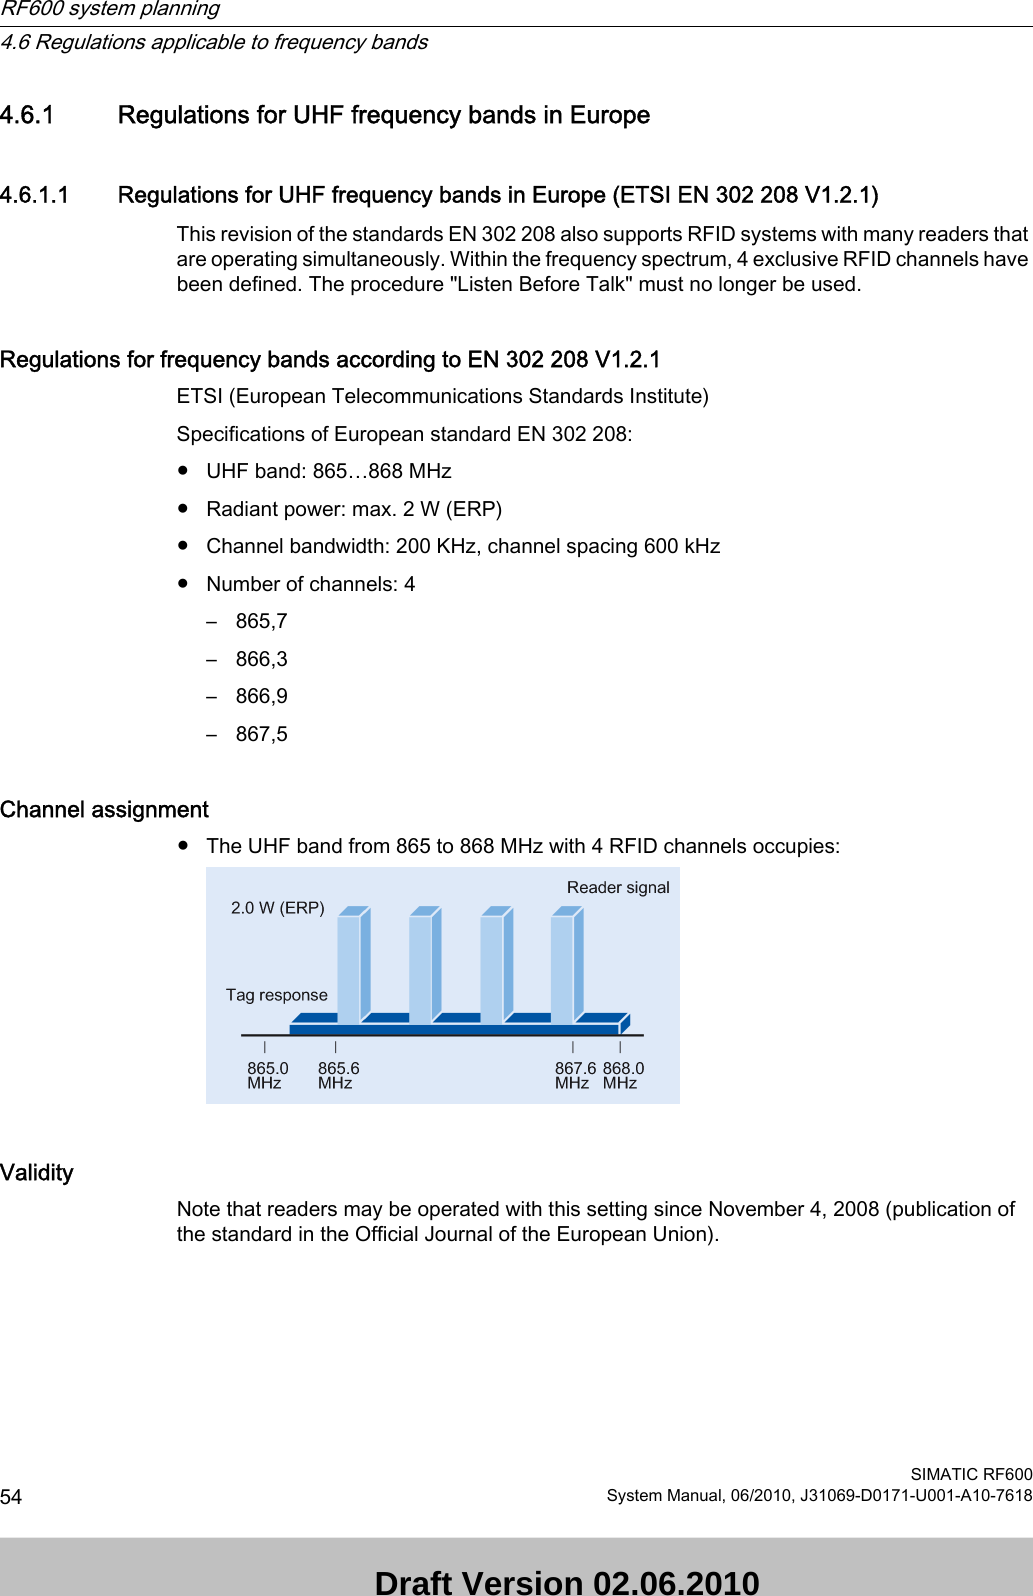 4.6.1 Regulations for UHF frequency bands in Europe4.6.1.1 Regulations for UHF frequency bands in Europe (ETSI EN 302 208 V1.2.1)This revision of the standards EN 302 208 also supports RFID systems with many readers that are operating simultaneously. Within the frequency spectrum, 4 exclusive RFID channels have been defined. The procedure &quot;Listen Before Talk&quot; must no longer be used.Regulations for frequency bands according to EN 302 208 V1.2.1  ETSI (European Telecommunications Standards Institute)Specifications of European standard EN 302 208:● UHF band: 865…868 MHz● Radiant power: max. 2 W (ERP)● Channel bandwidth: 200 KHz, channel spacing 600 kHz● Number of channels: 4– 865,7– 866,3– 866,9– 867,5Channel assignment● The UHF band from 865 to 868 MHz with 4 RFID channels occupies:ValidityNote that readers may be operated with this setting since November 4, 2008 (publication of the standard in the Official Journal of the European Union). RF600 system planning4.6 Regulations applicable to frequency bandsSIMATIC RF60054 System Manual, 06/2010, J31069-D0171-U001-A10-7618 Draft Version 02.06.2010 